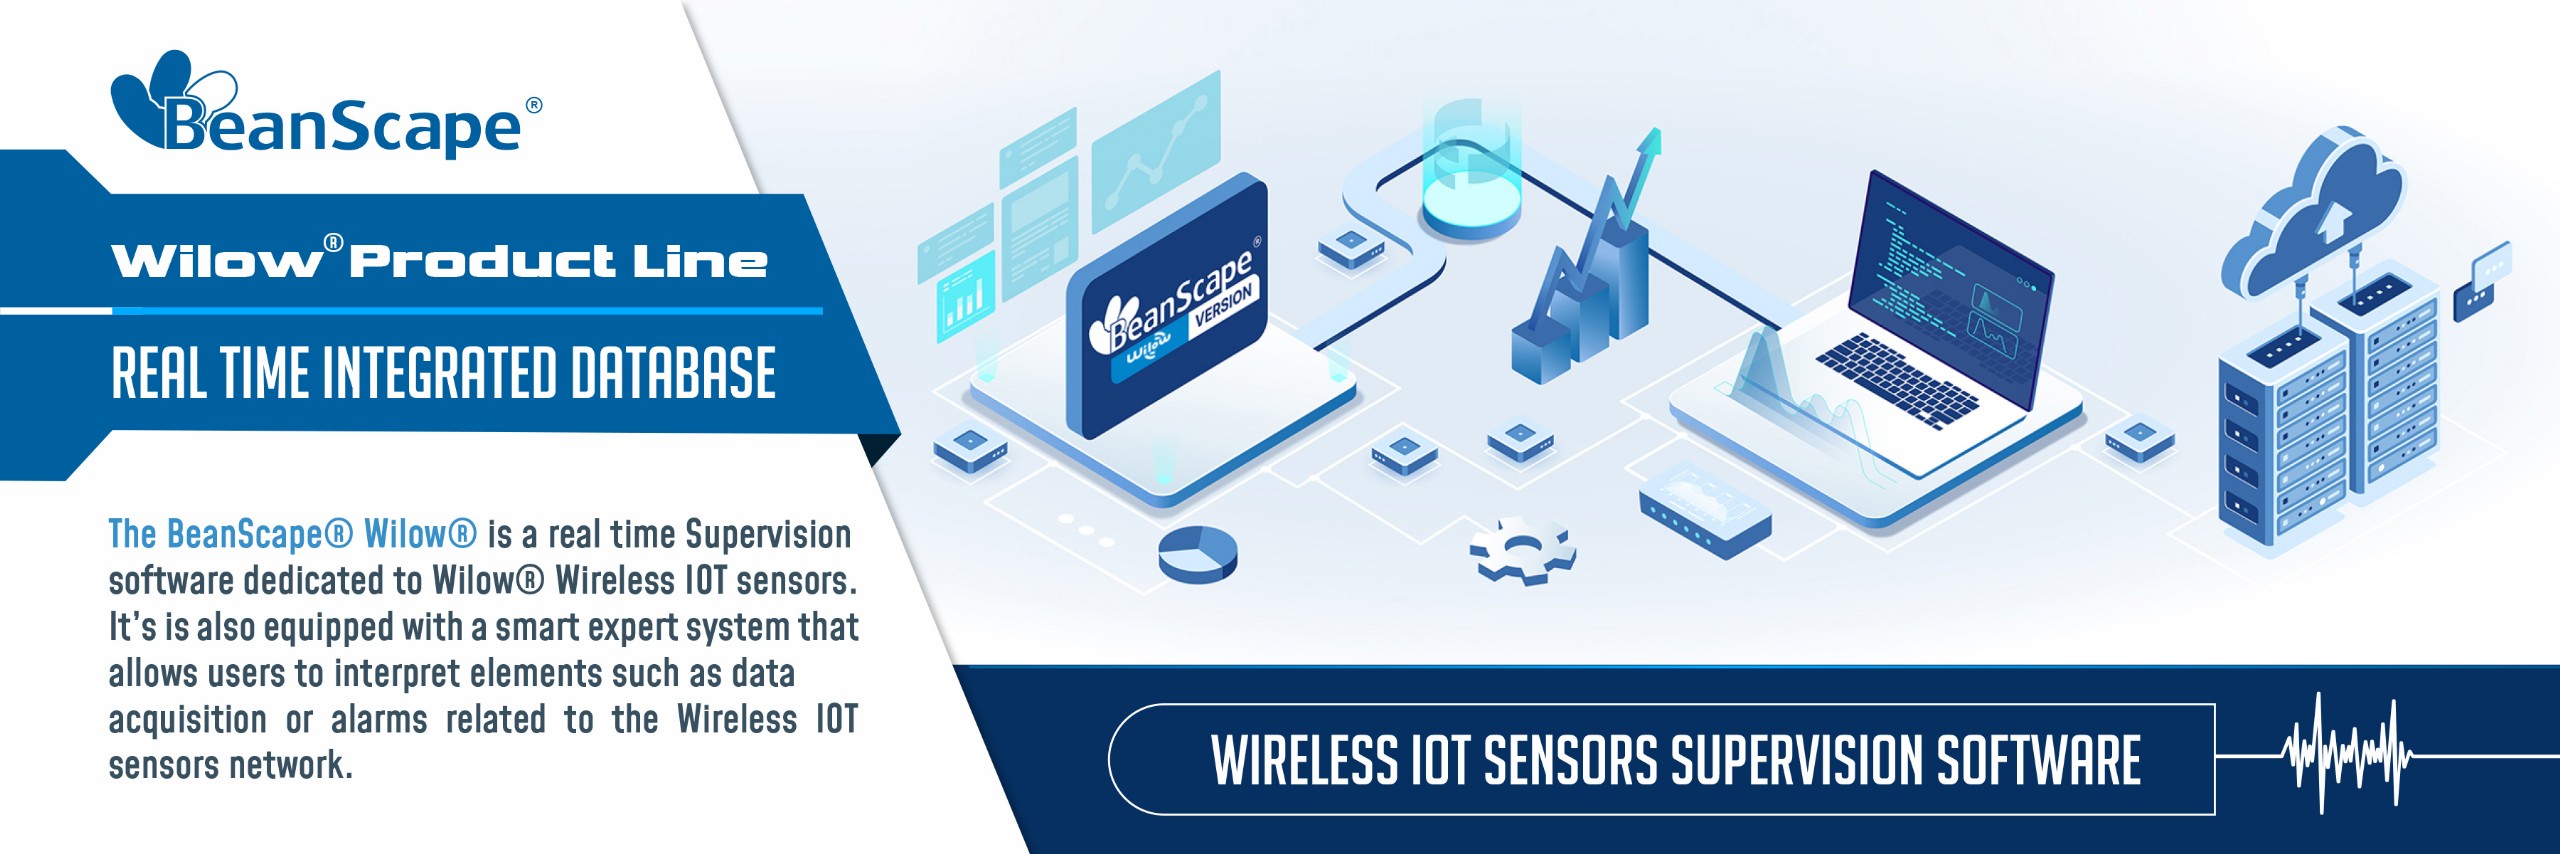 « beanscape wilow wifi wireless supervision software »